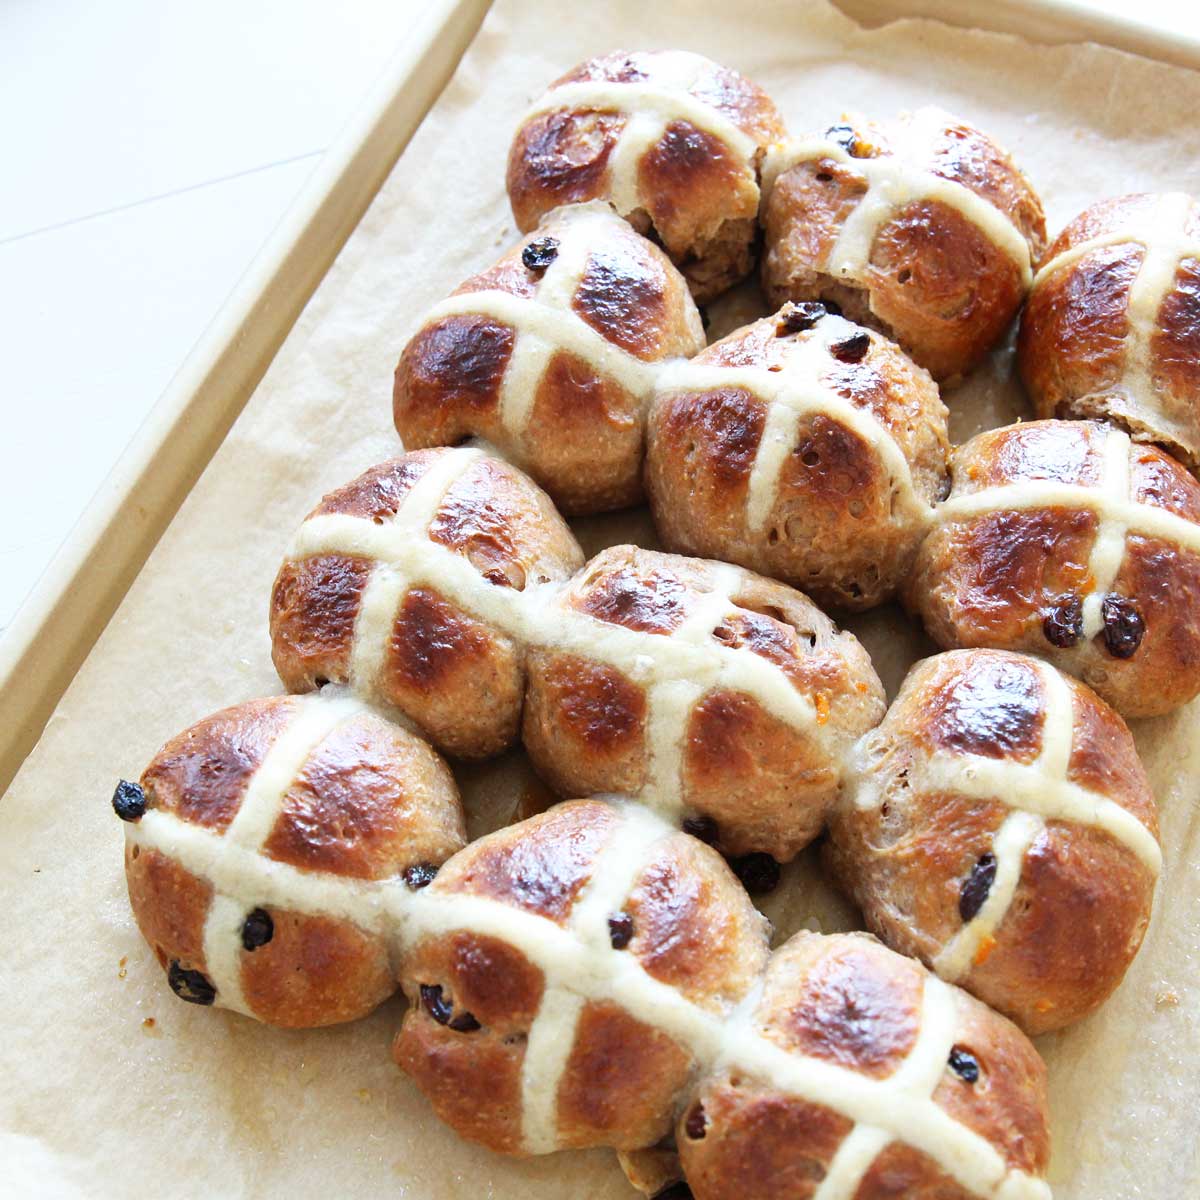 Soft & Fluffy Ricotta Cheese Hot Cross Buns - Perfect for Easter! - Carrot Cake Cinnamon Rolls